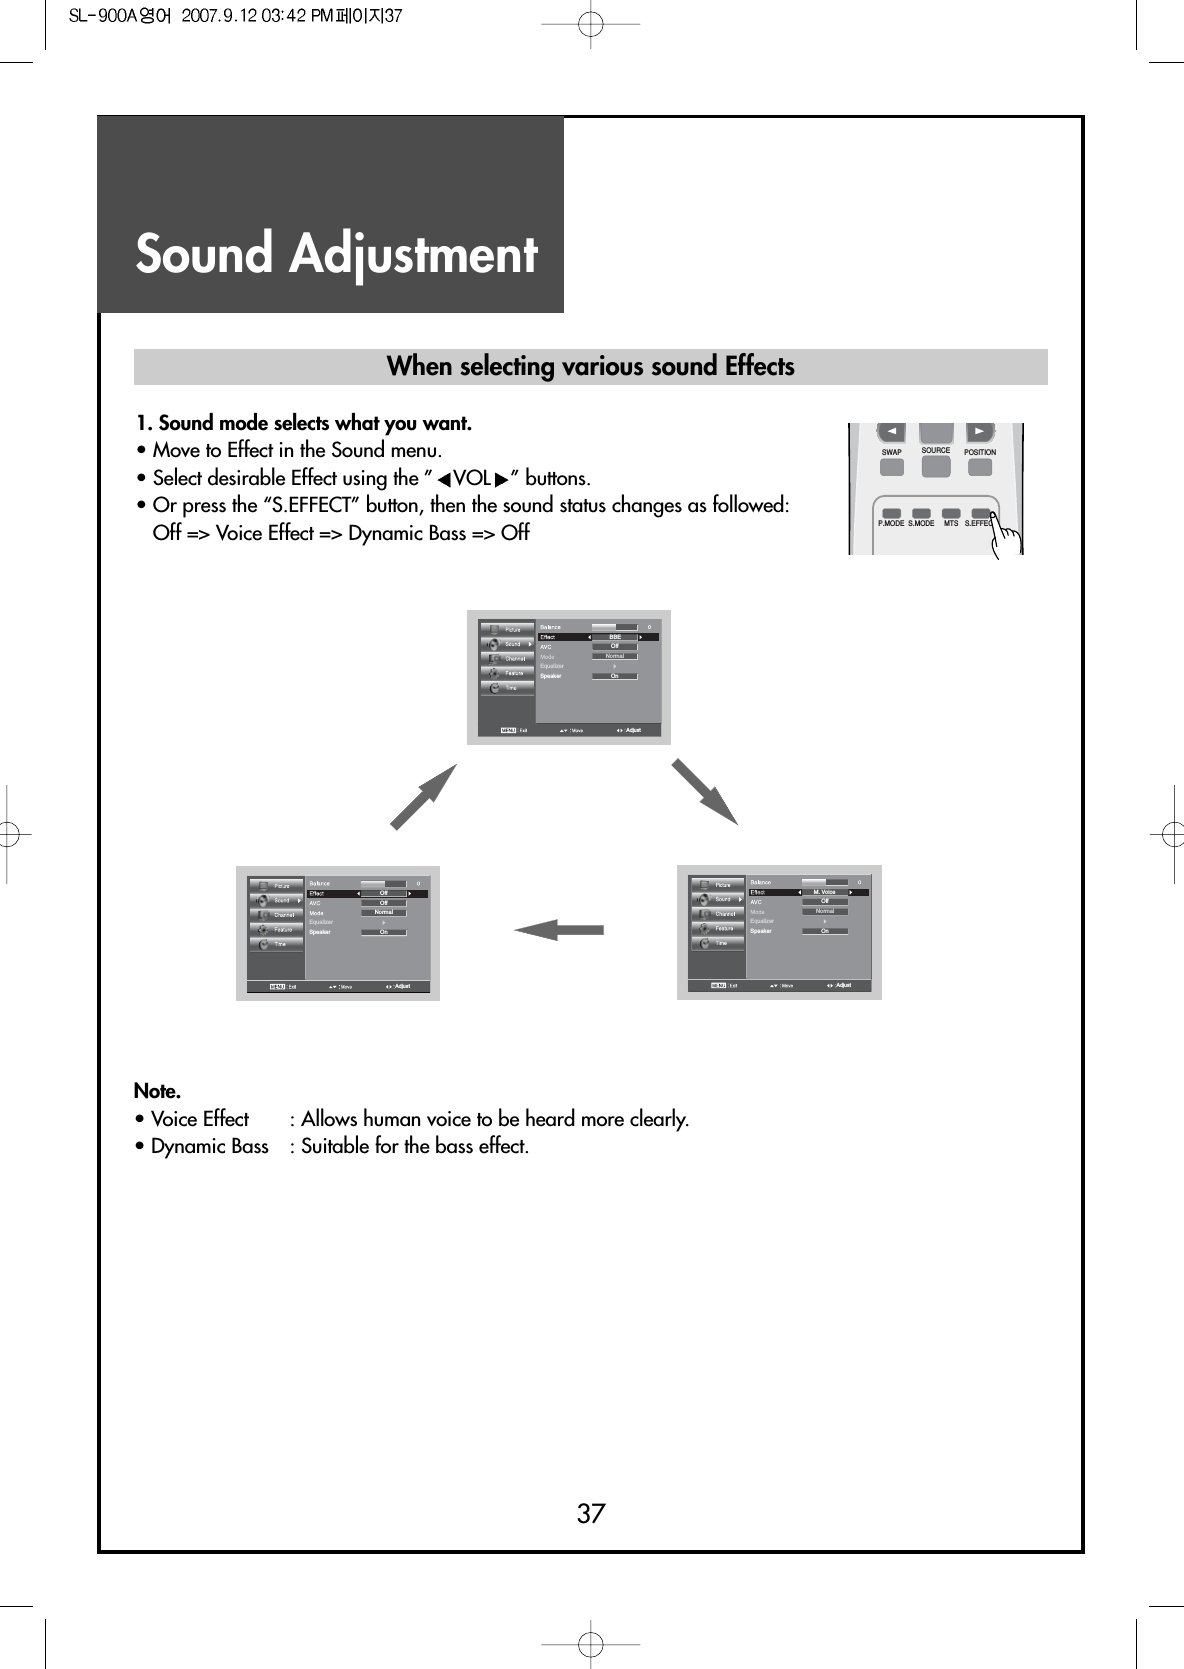 Sound Adjustment37When selecting various sound Effects1. Sound mode selects what you want.                                    • Move to Effect in the Sound menu.• Select desirable Effect using the ” VOL ” buttons.• Or press the “S.EFFECT” button, then the sound status changes as followed:Off =&gt; Voice Effect =&gt; Dynamic Bass =&gt; OffAdjustEqualizerOnOffNormalSpeakerBBEAdjustEqualizerOnOffNormalSpeakerOffAdjustEqualizerOnOffNormalSpeakerM. VoiceNote.• Voice Effect  : Allows human voice to be heard more clearly.• Dynamic Bass  : Suitable for the bass effect.SWAPP.MODE S.MODE S.EFFECTMTSSOURCE POSITION